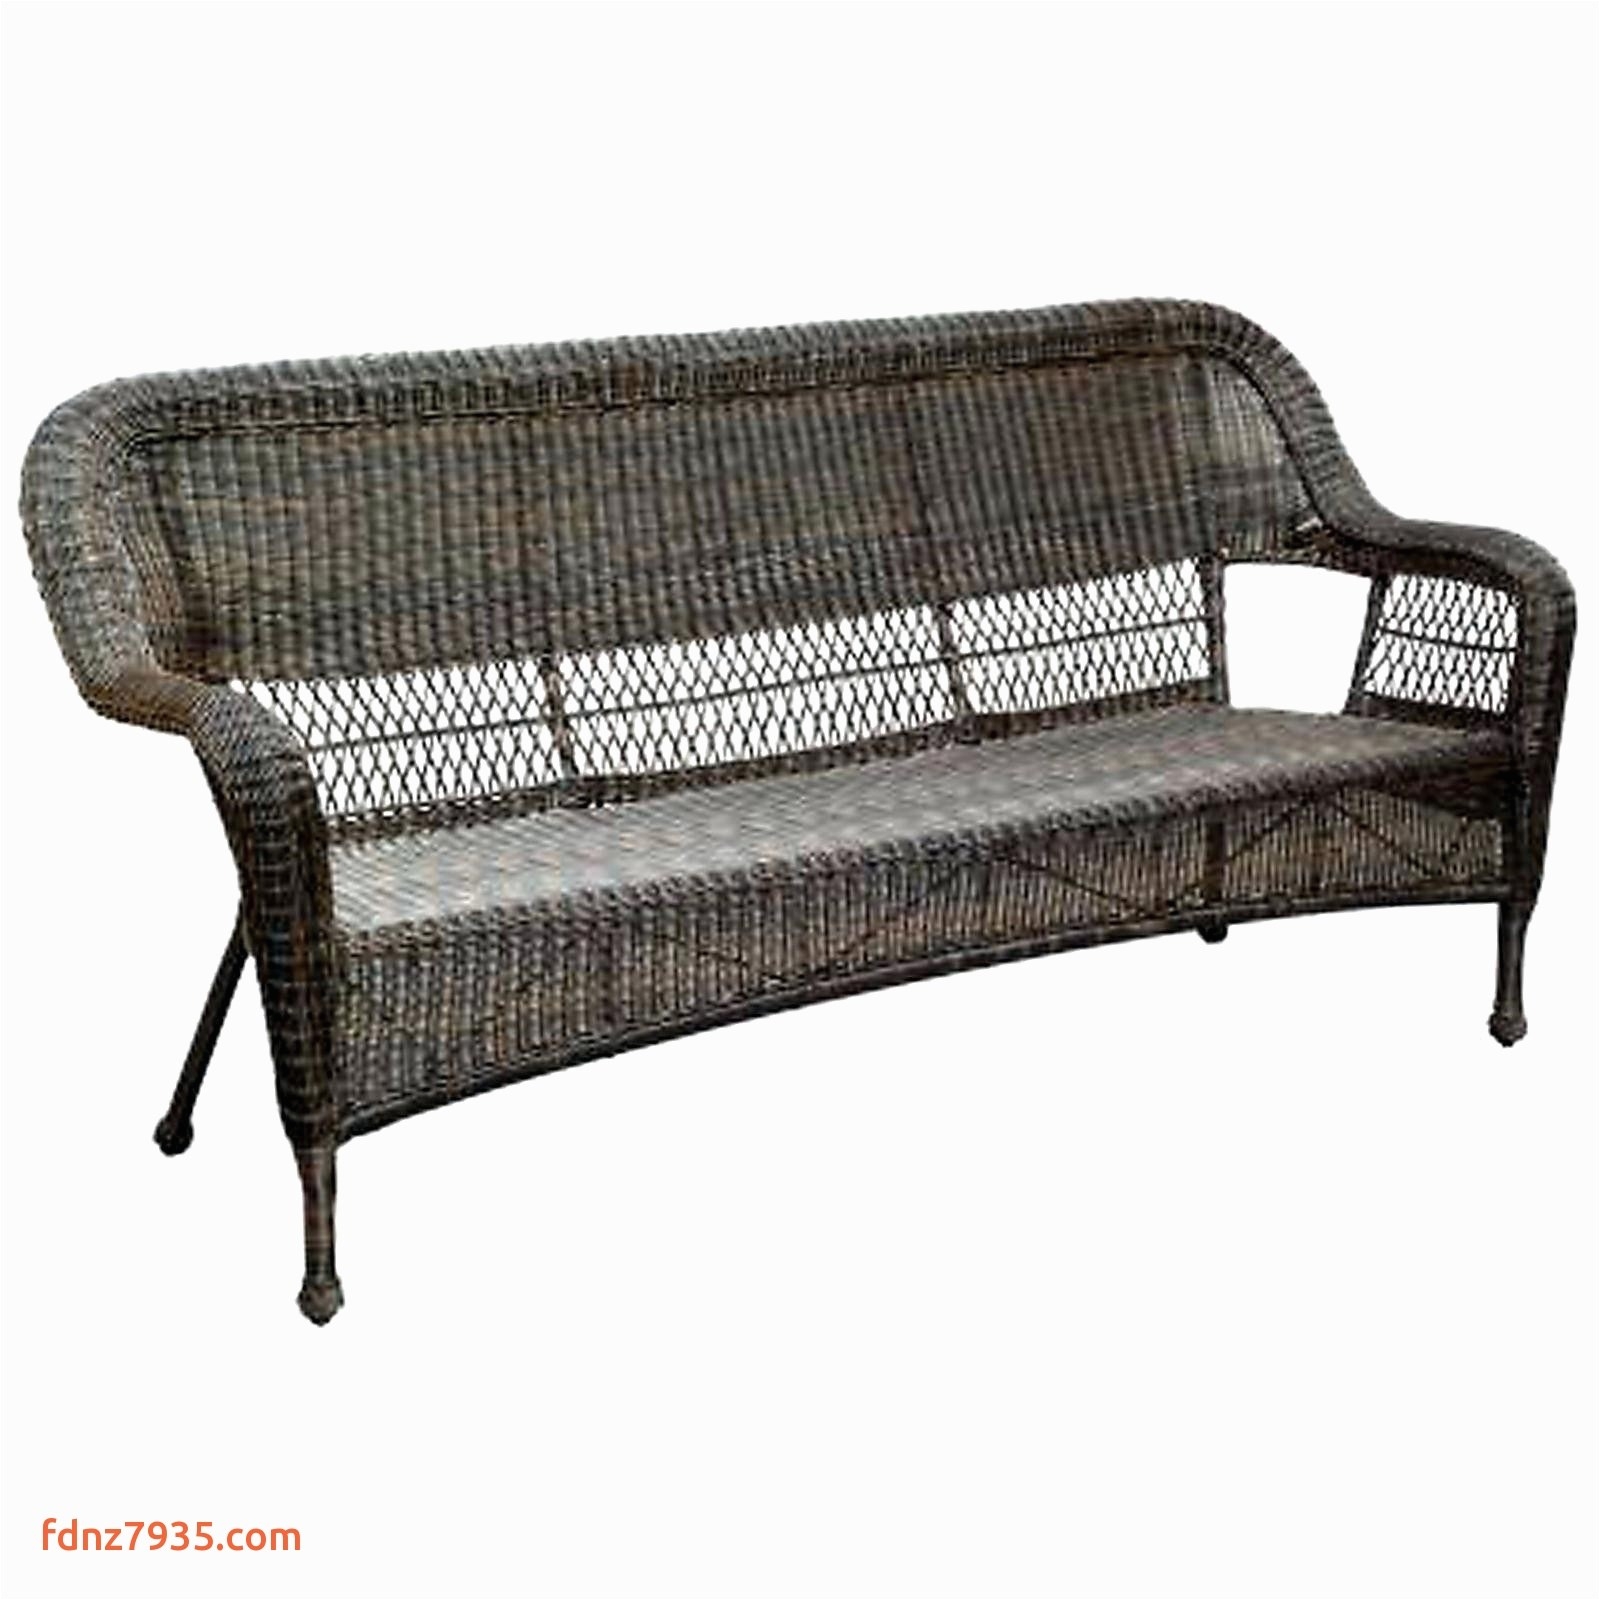 df patio furniture red patio chairs unique wicker outdoor sofa 0d patio chairs sale